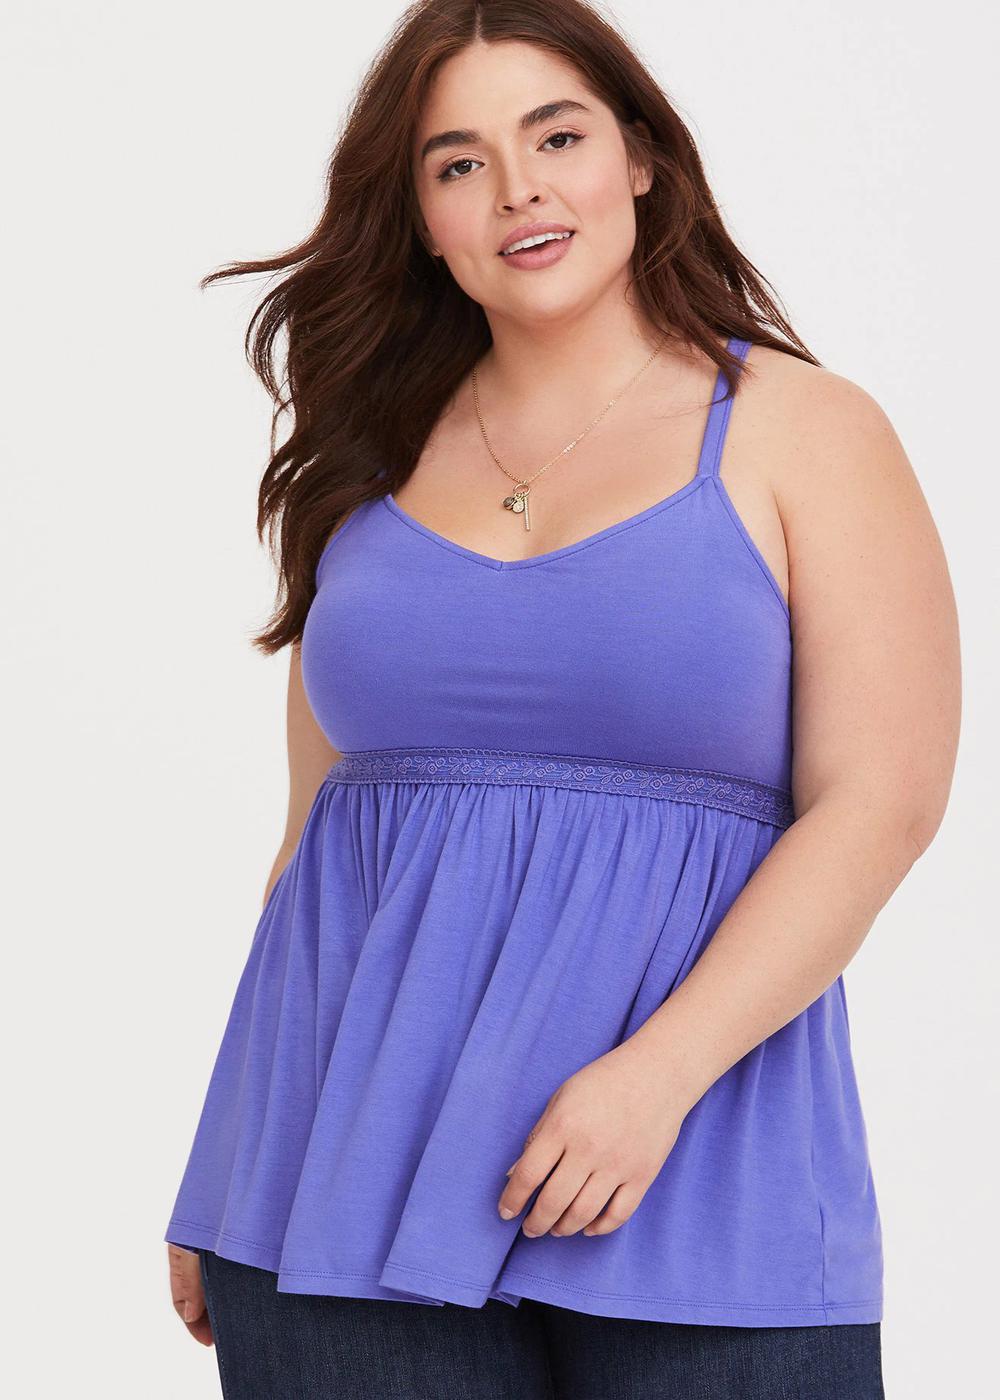 Torrid Similar Stores and Brands, Review, Promo Codes, Q&A Modvisor